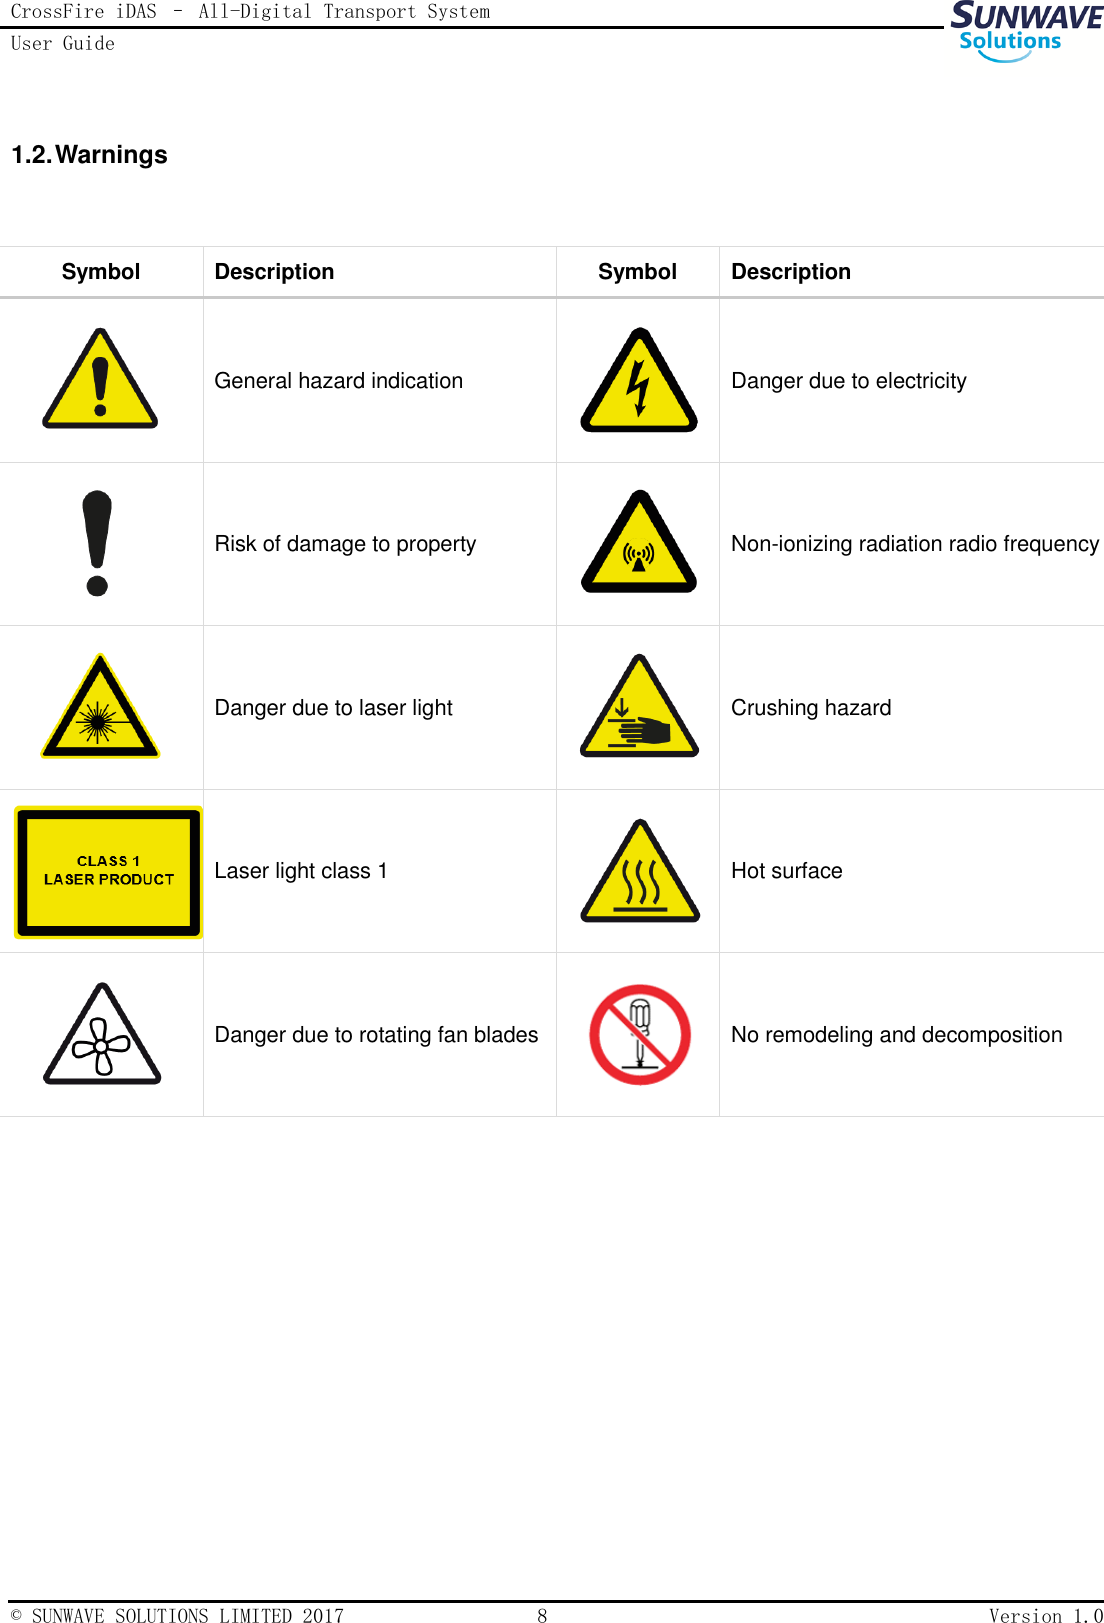 CrossFire iDAS – All-Digital Transport System User Guide   © SUNWAVE SOLUTIONS LIMITED 2017  8  Version 1.0   1.2. Warnings    Symbol Description Symbol Description  General hazard indication  Danger due to electricity  Risk of damage to property  Non-ionizing radiation radio frequency  Danger due to laser light  Crushing hazard  Laser light class 1  Hot surface  Danger due to rotating fan blades  No remodeling and decomposition 